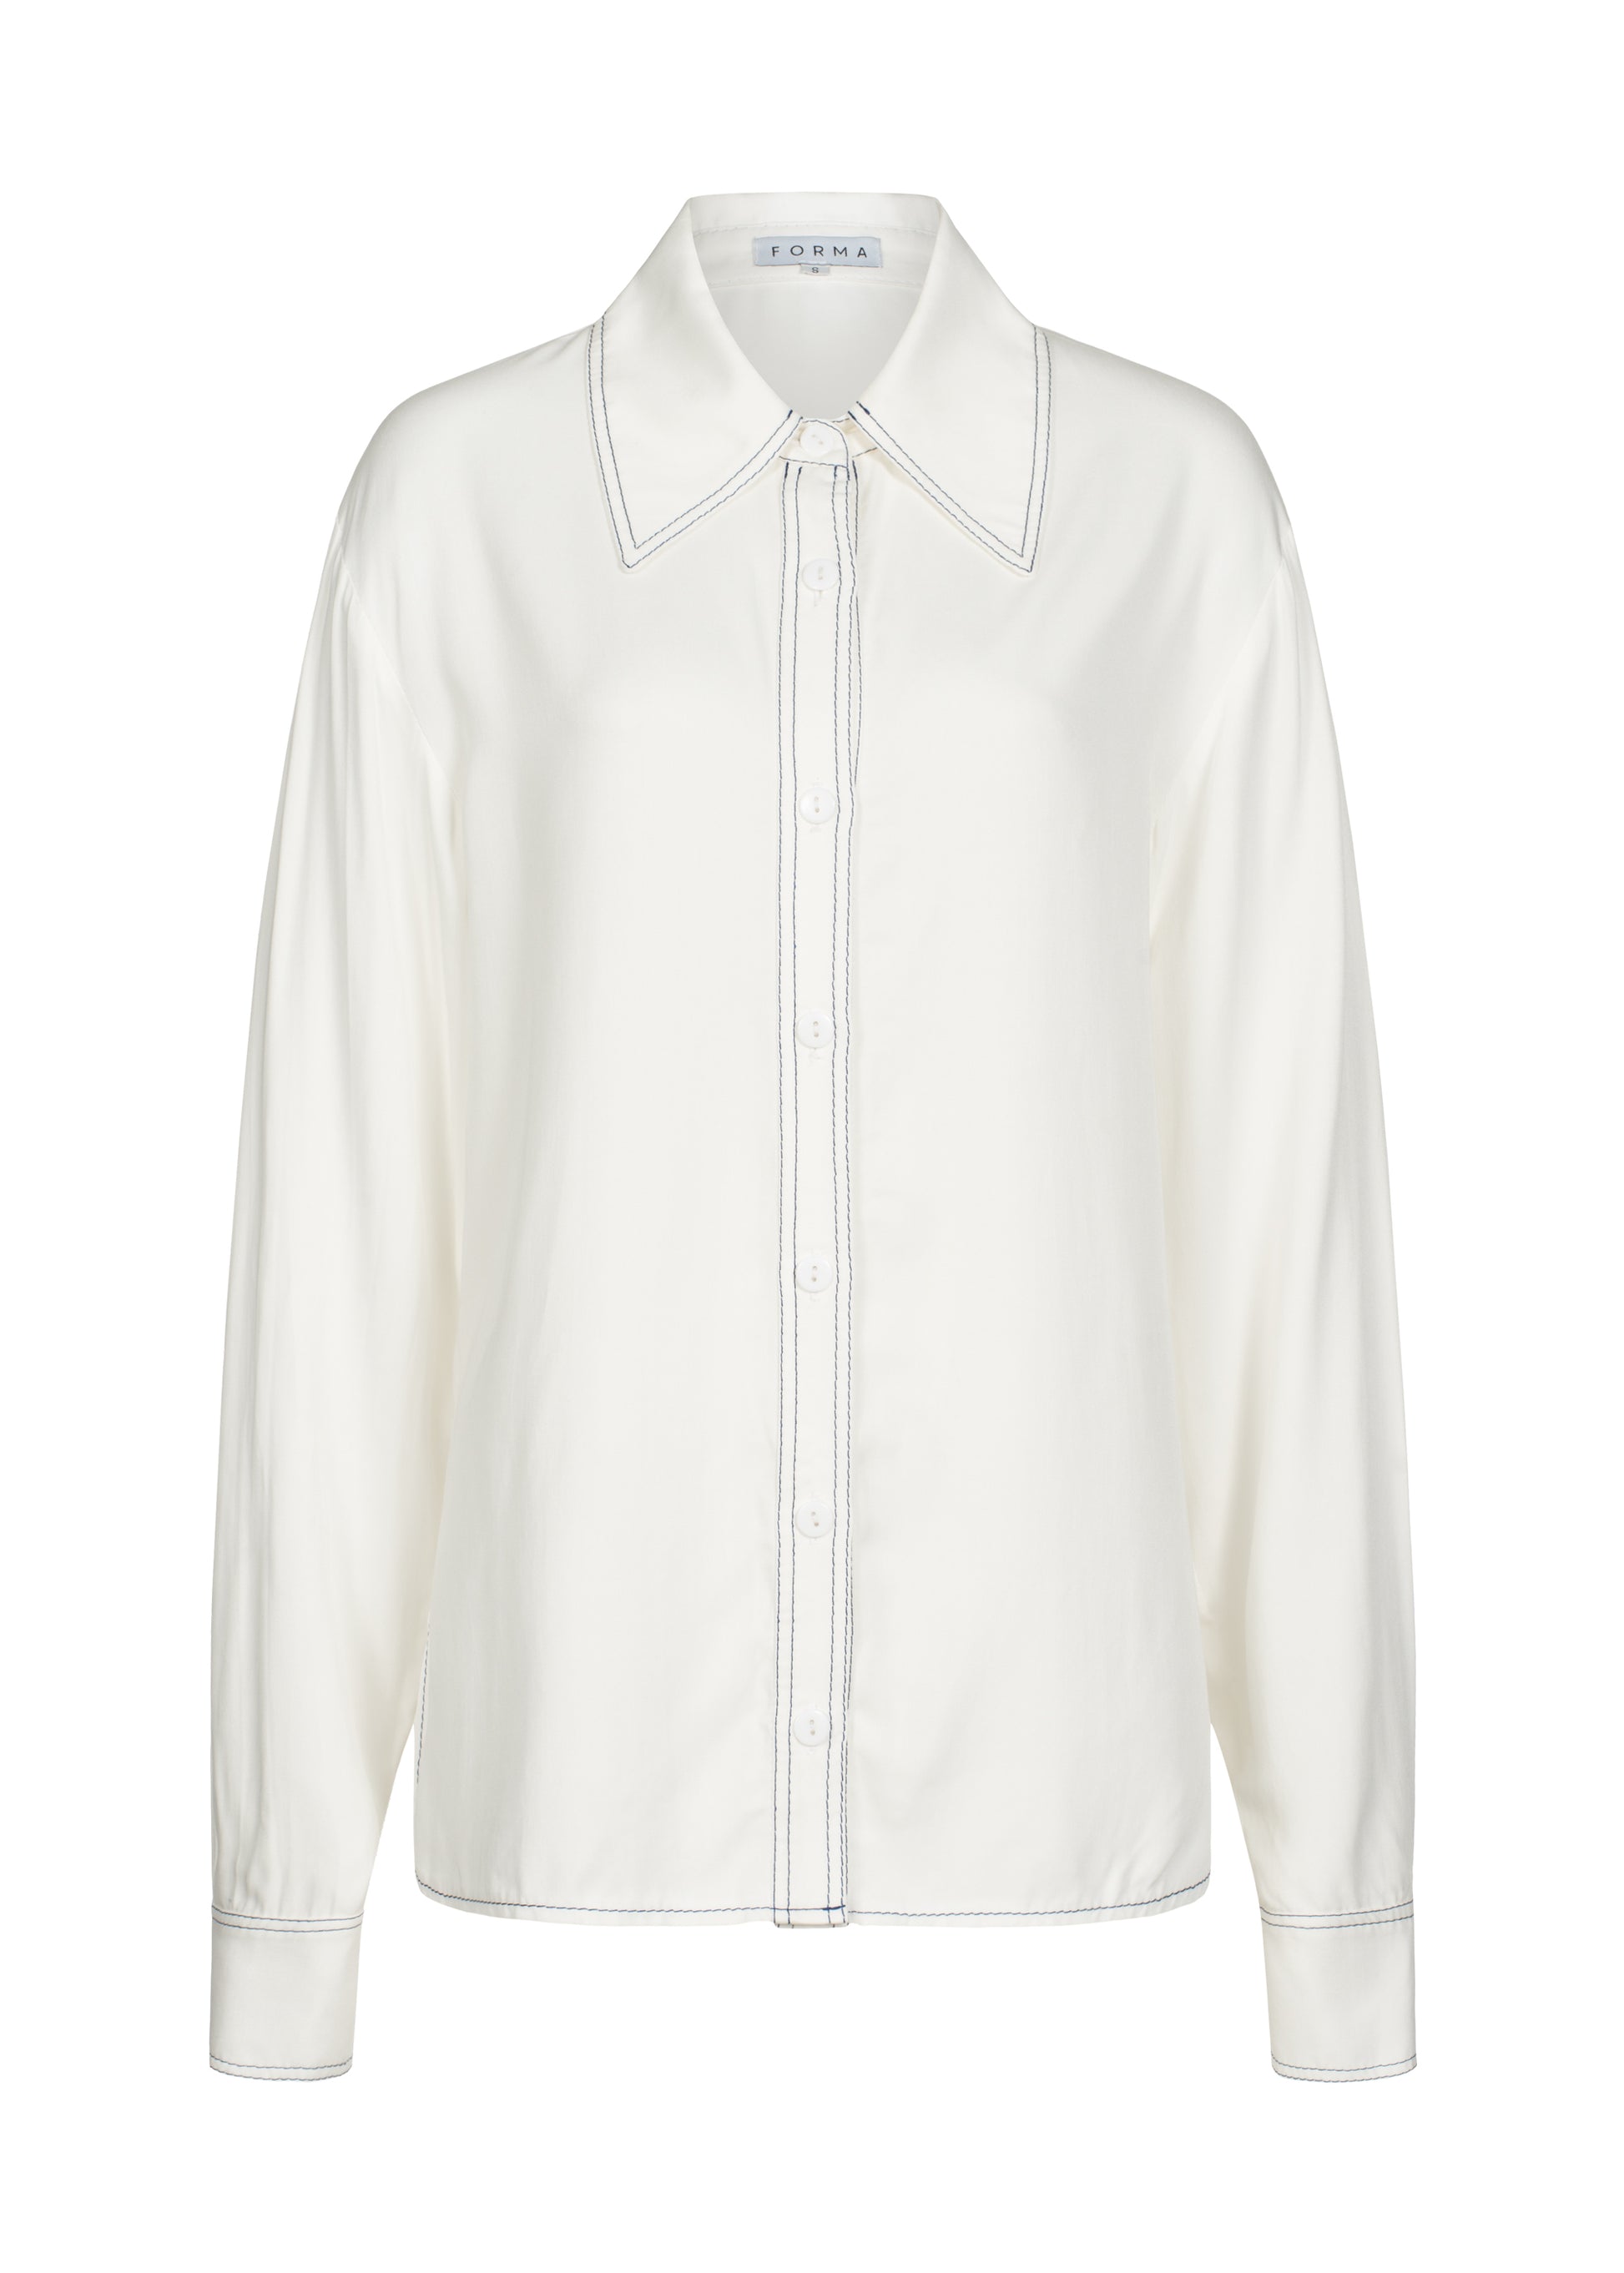 Shirt with a contrast stitching - White. FORMA clothing brand